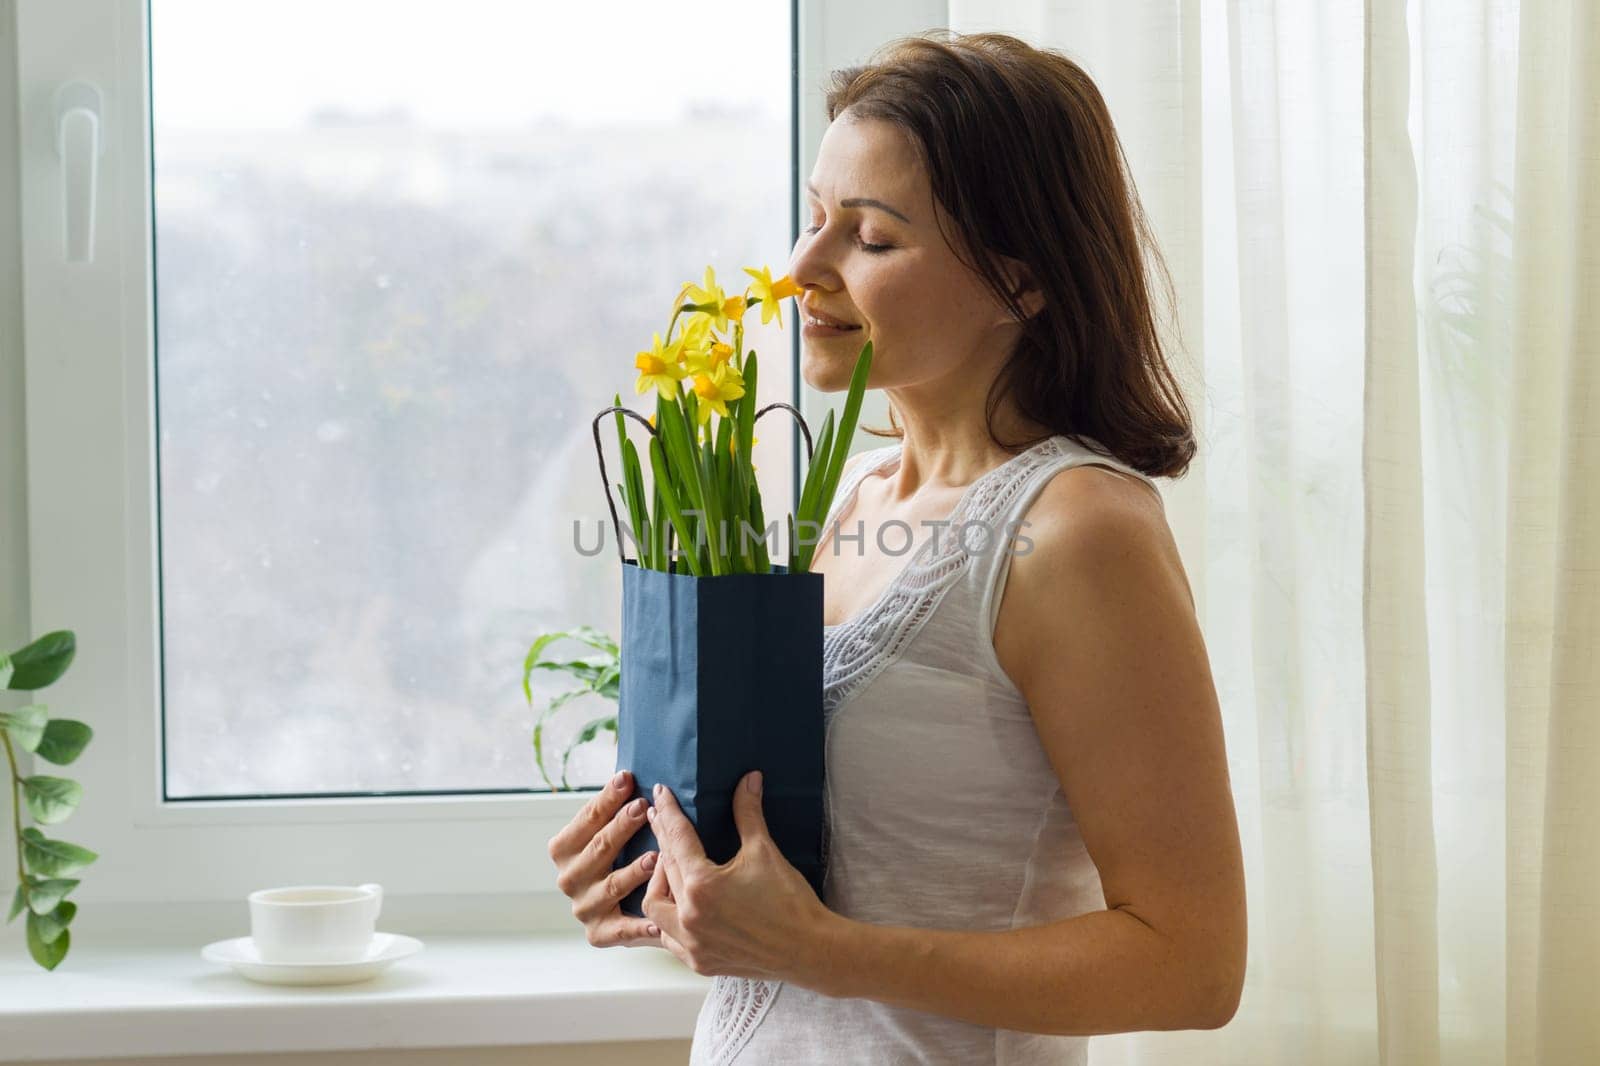 Mature woman holding bouquet of yellow spring flowers, enjoys flowers. Picture of the house, in the morning near the window